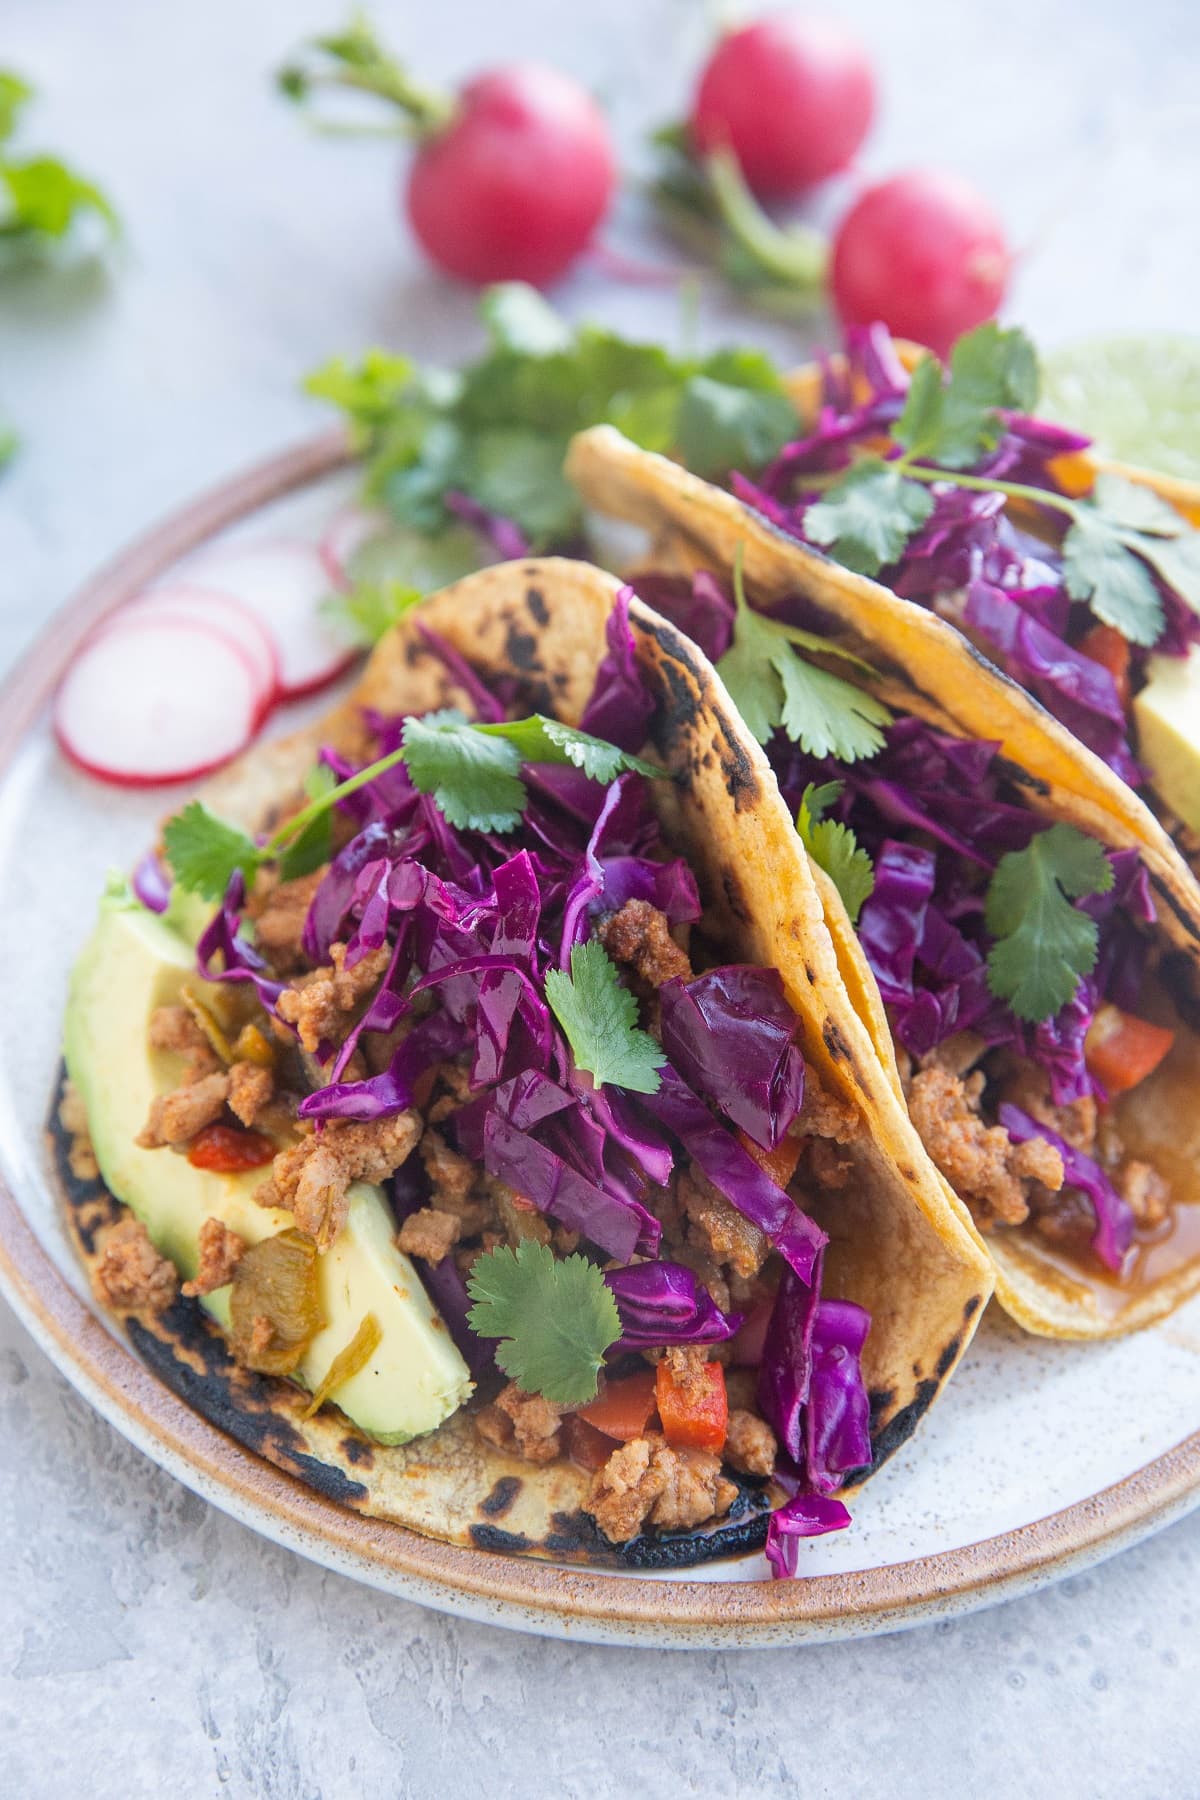 Three tacos on a plate with corn tortillas, avocado and cabbage slaw.